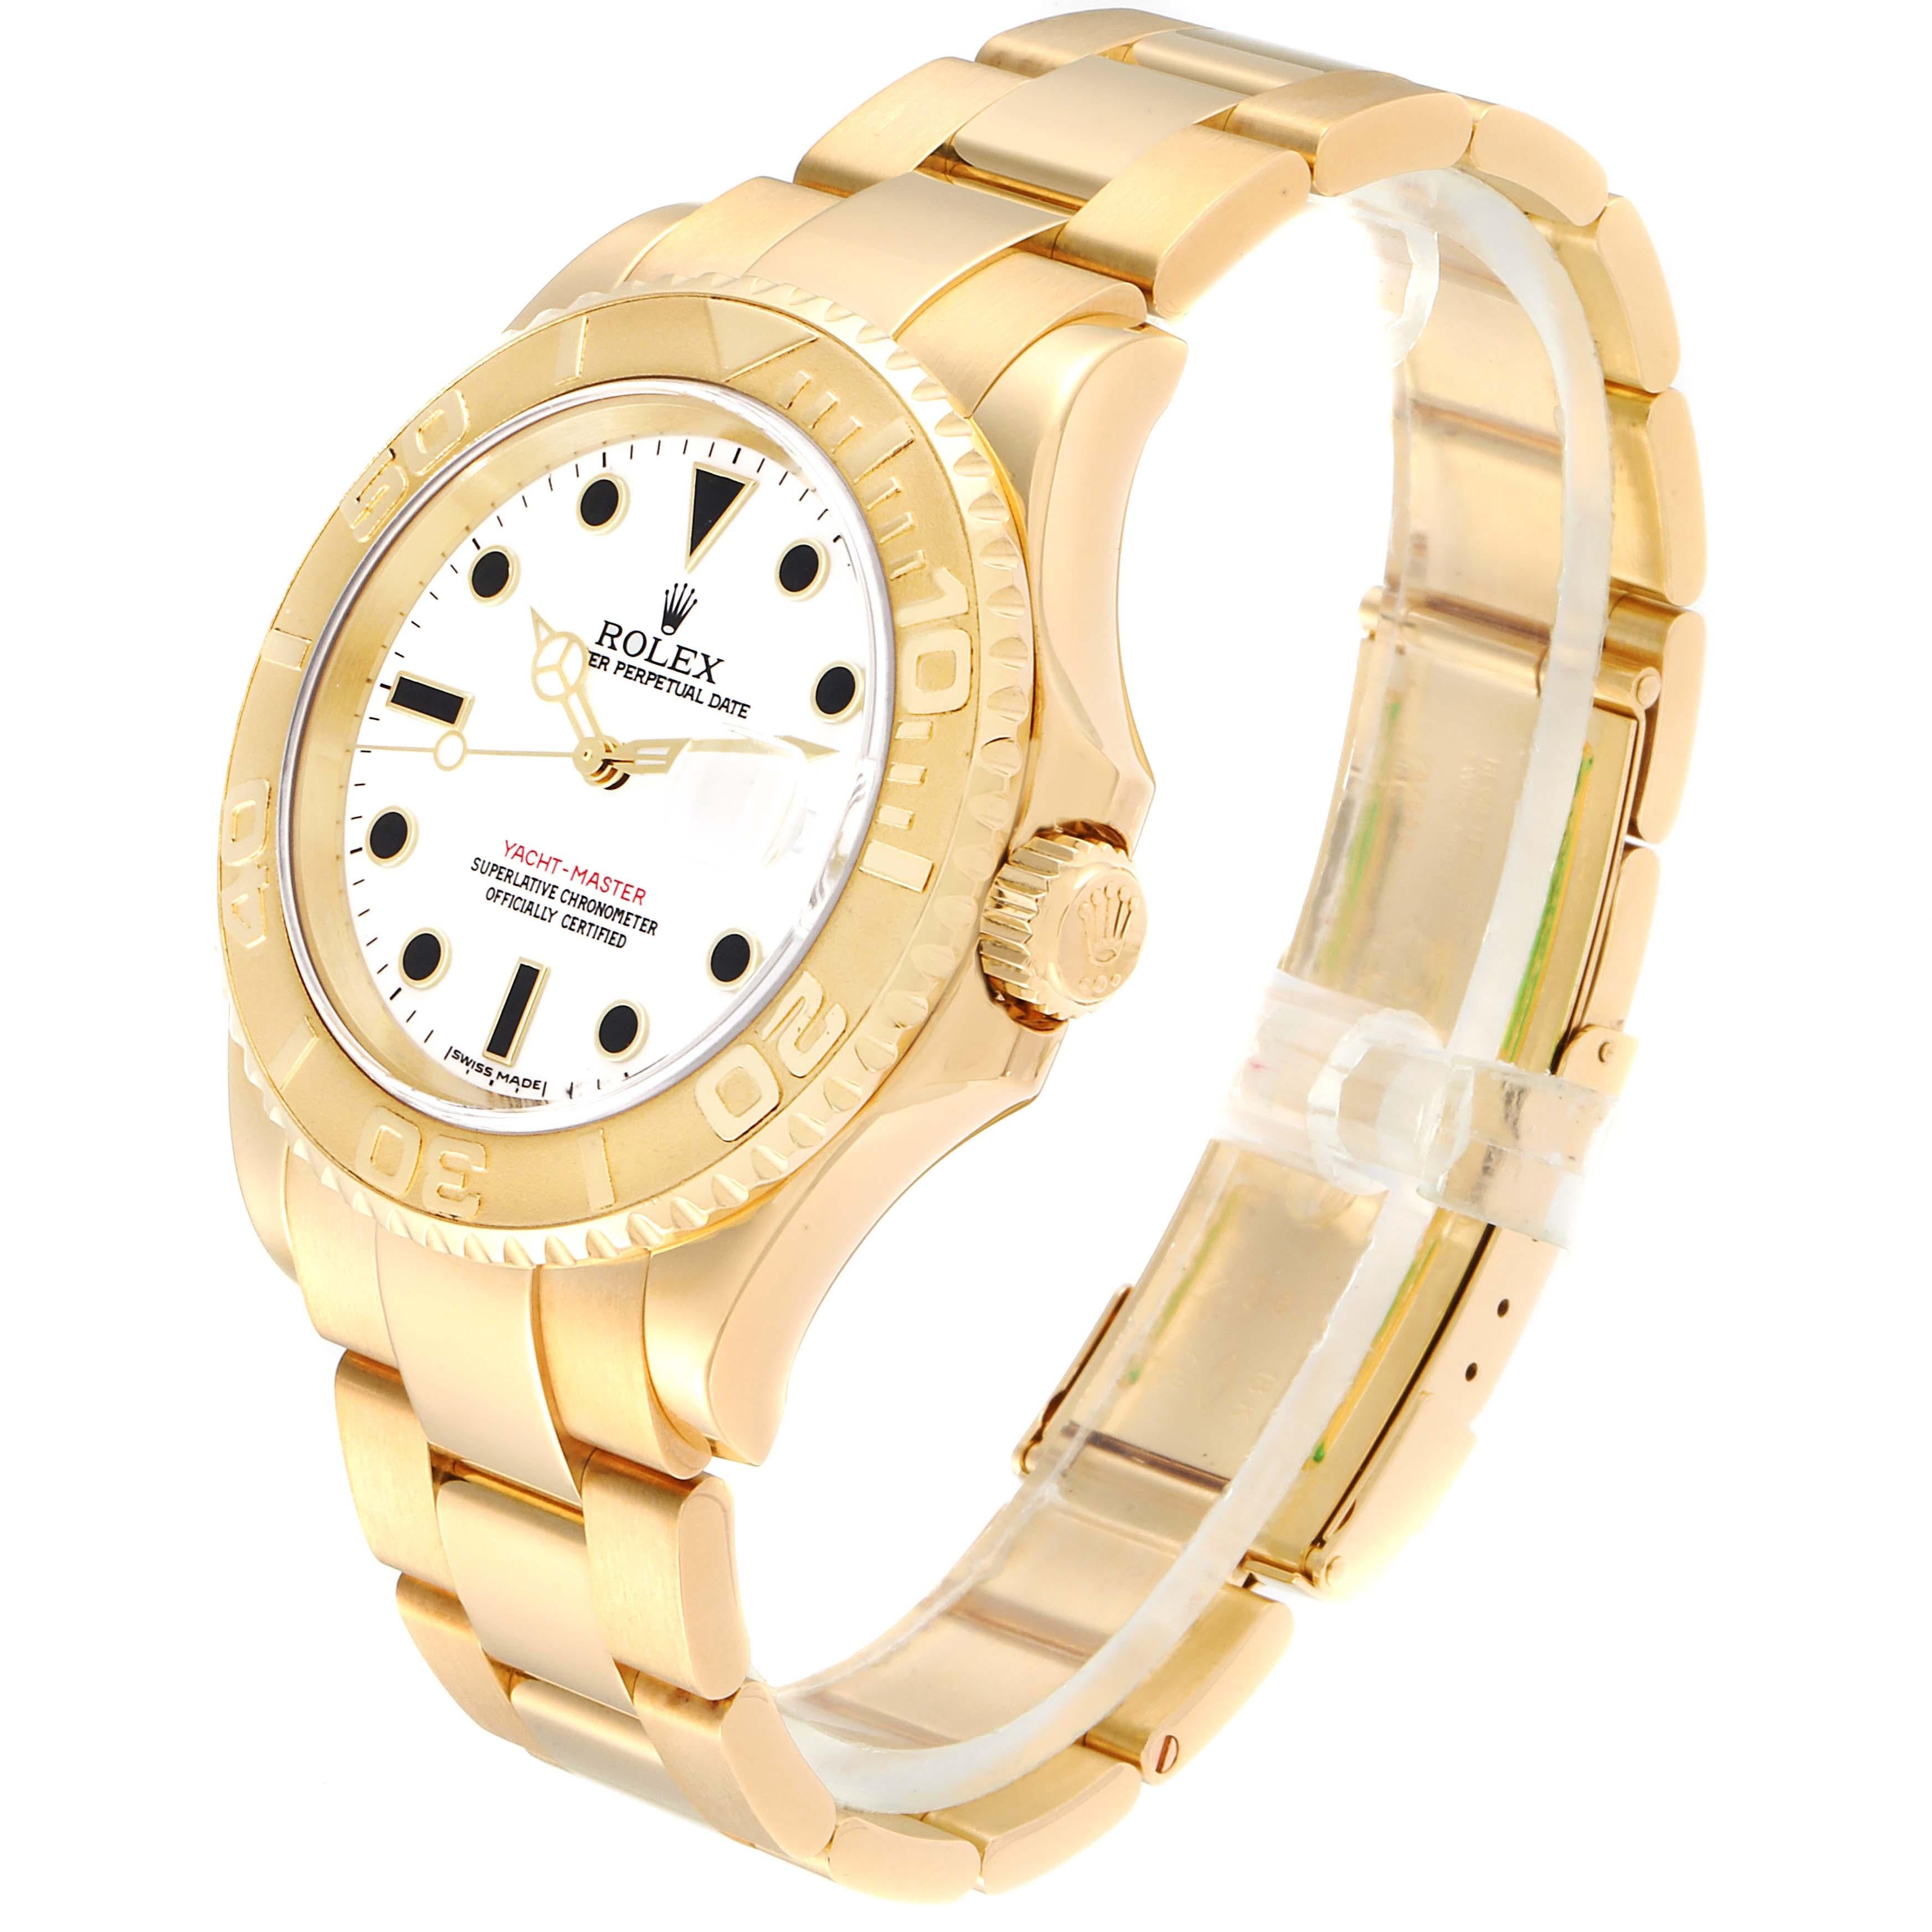 Rolex Yachtmaster 40 Yellow Gold White Dial Men's Watch 16628 Box Papers 1